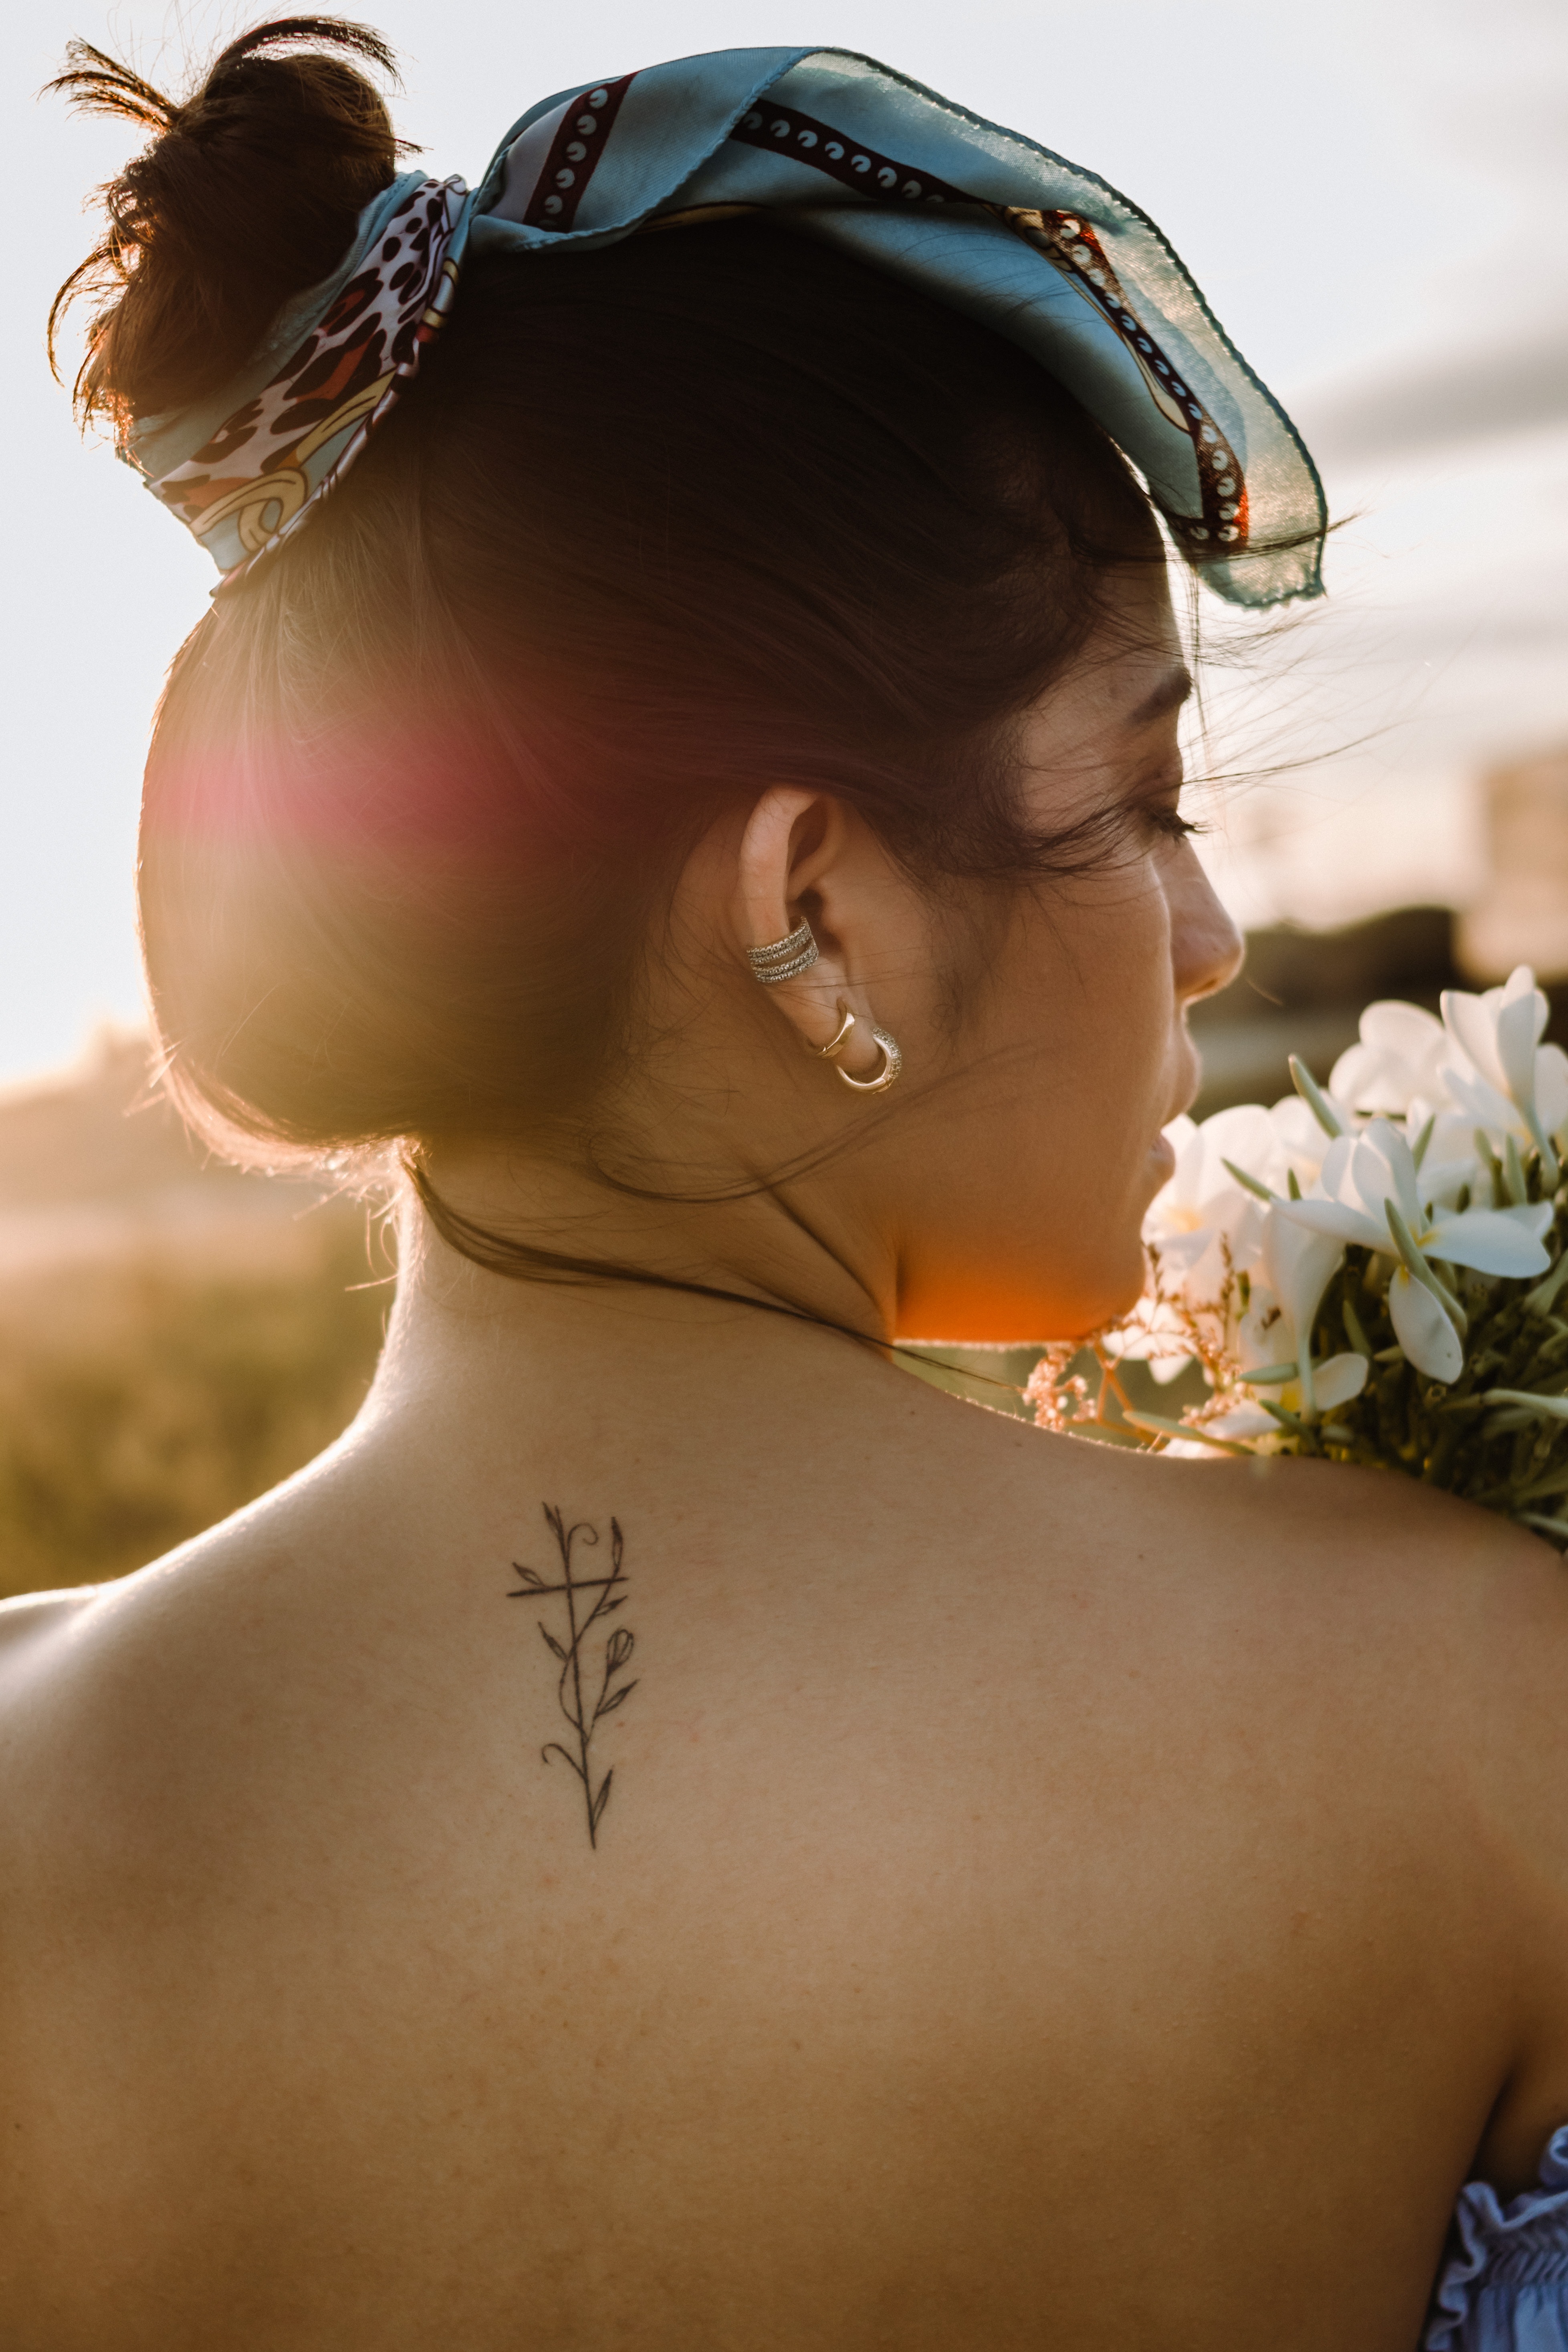 Back Tattoos Ideas For Women To Get Pretty Designs 2020